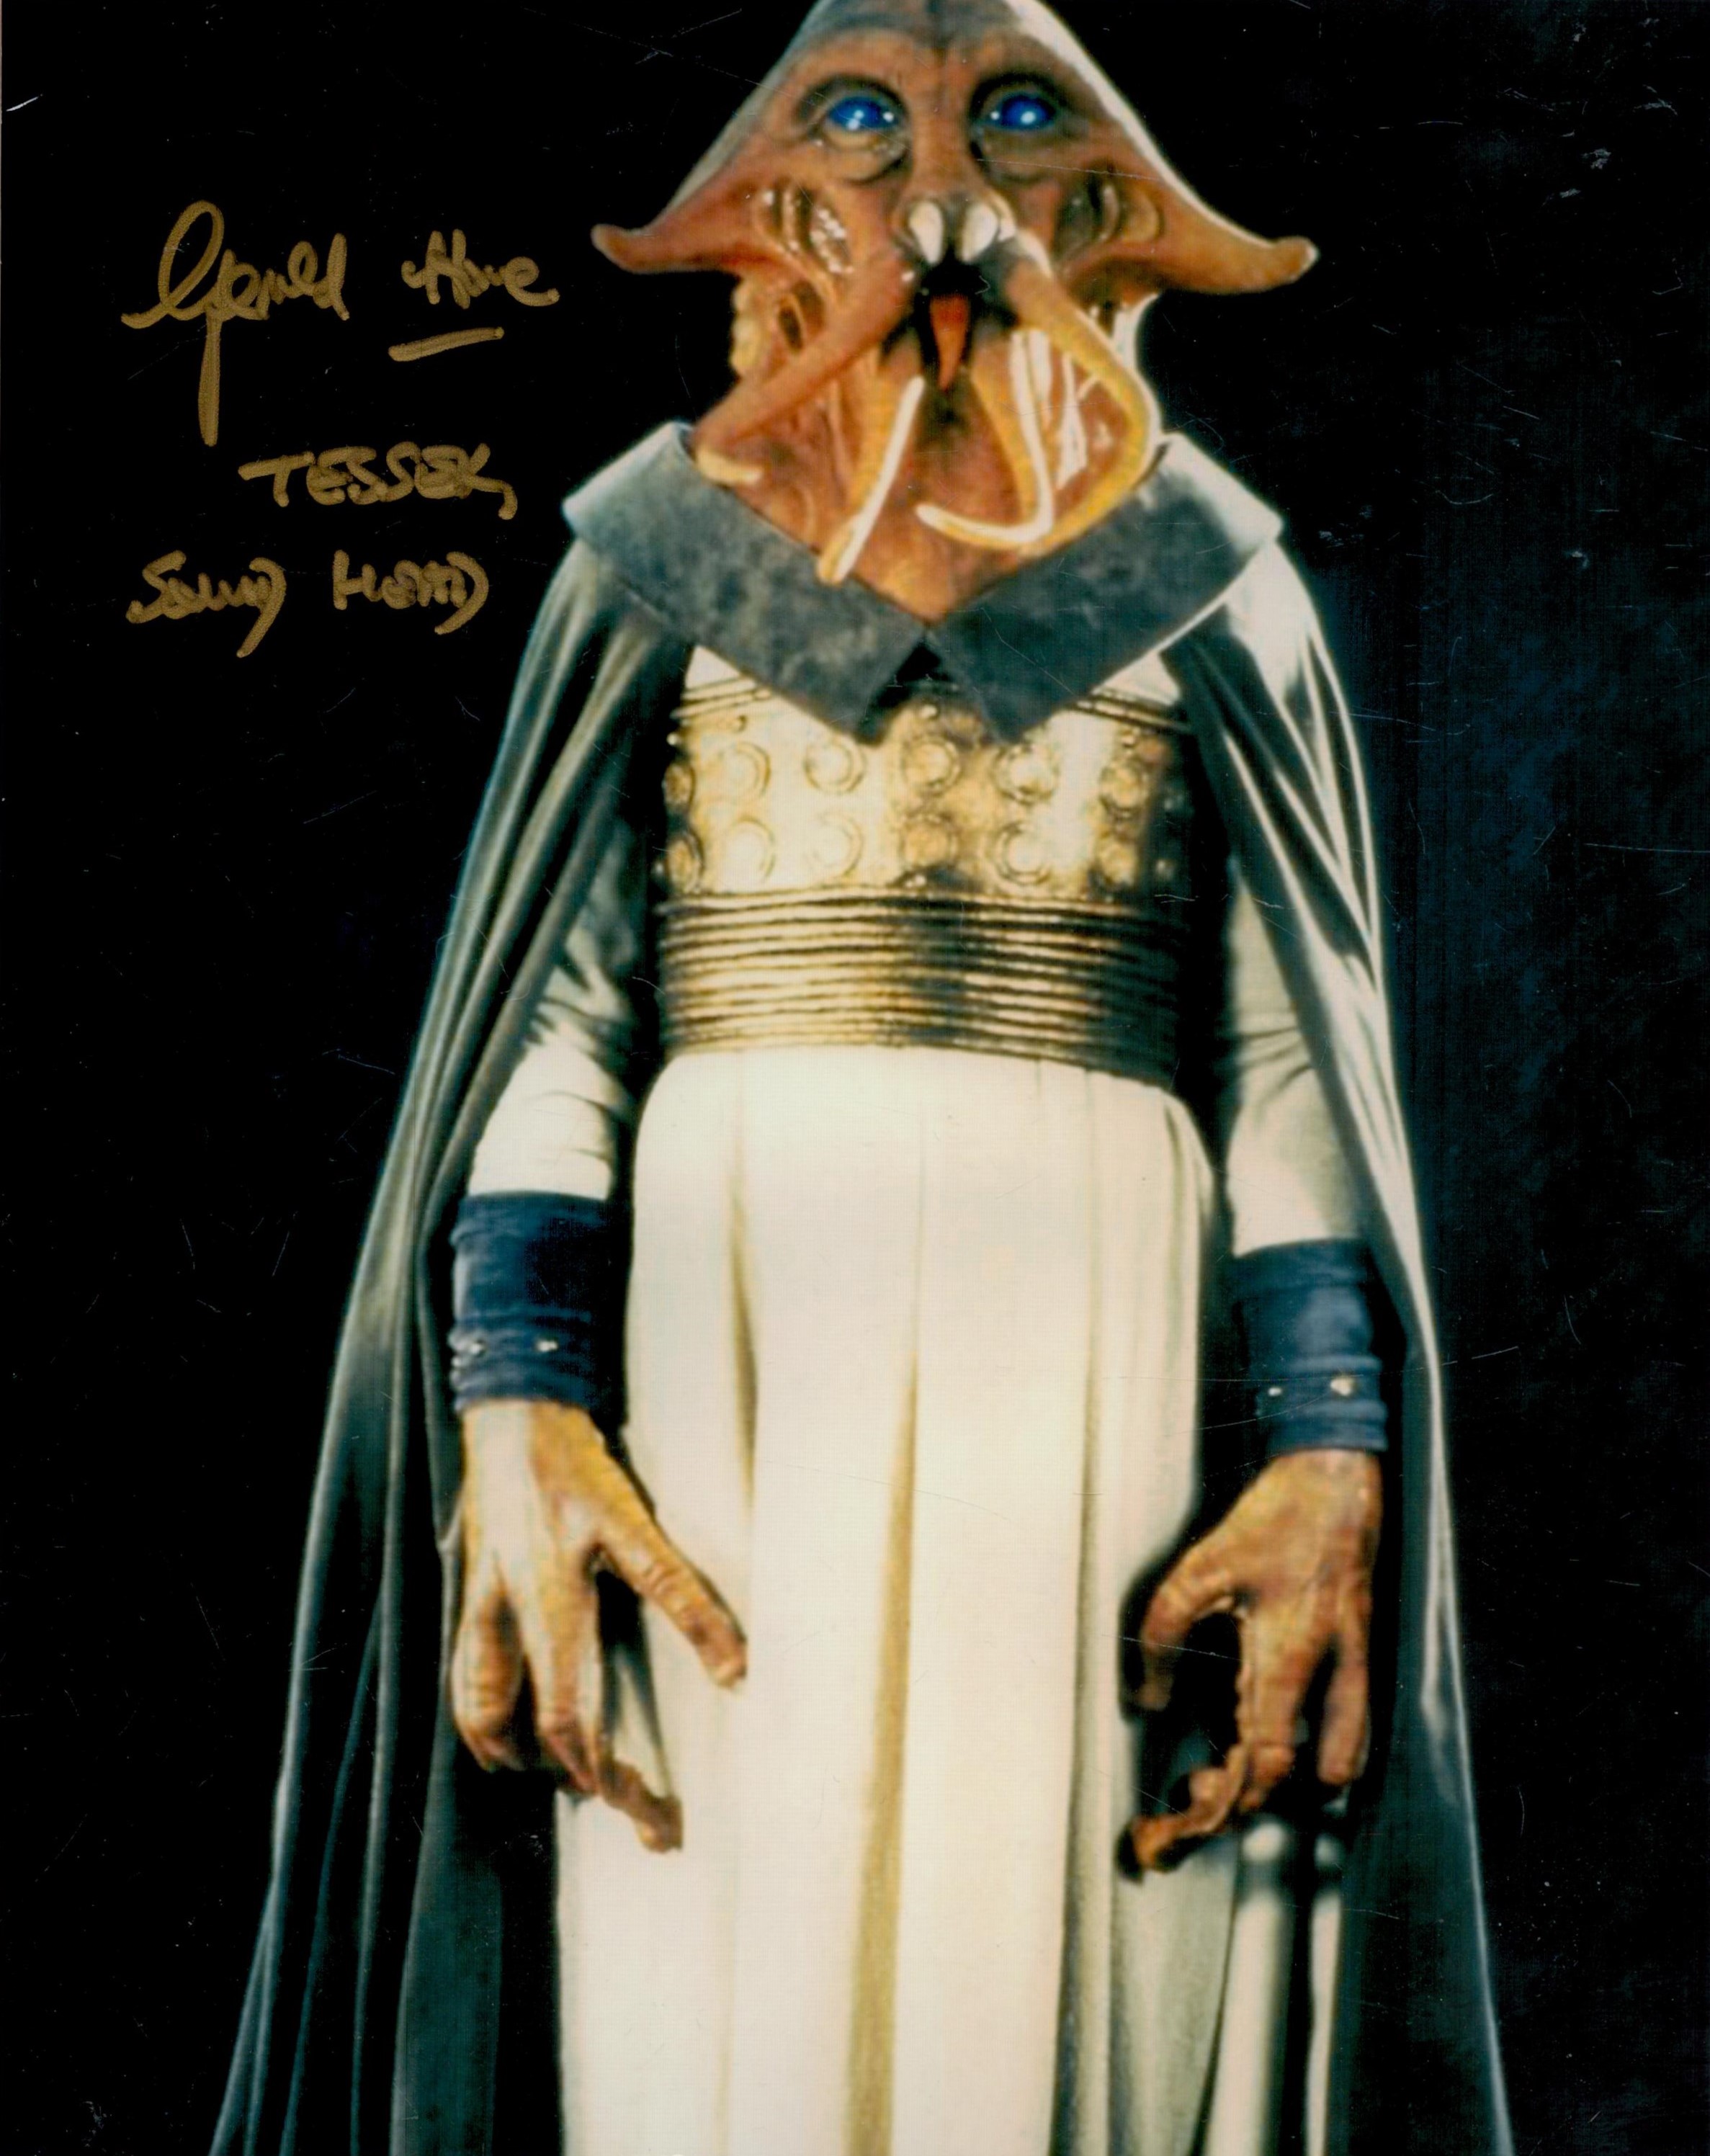 Gerald Home signed 10x8 inch Star Wars colour photo. Good Condition. All autographs come with a